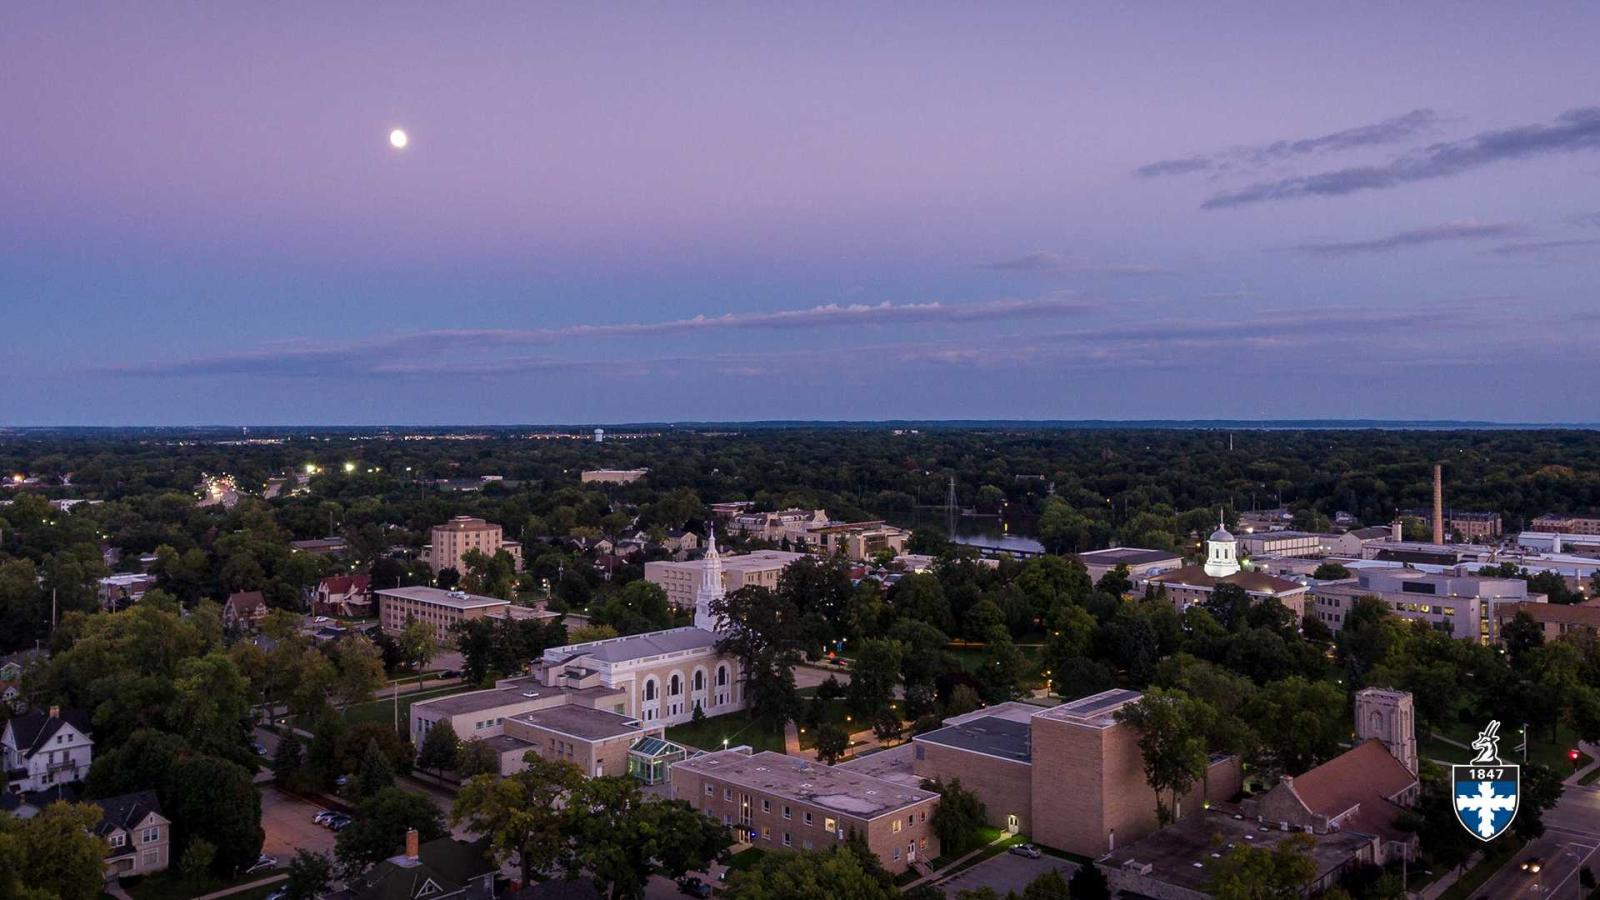 Aerial of campus at dusk with moon in the distant sky.